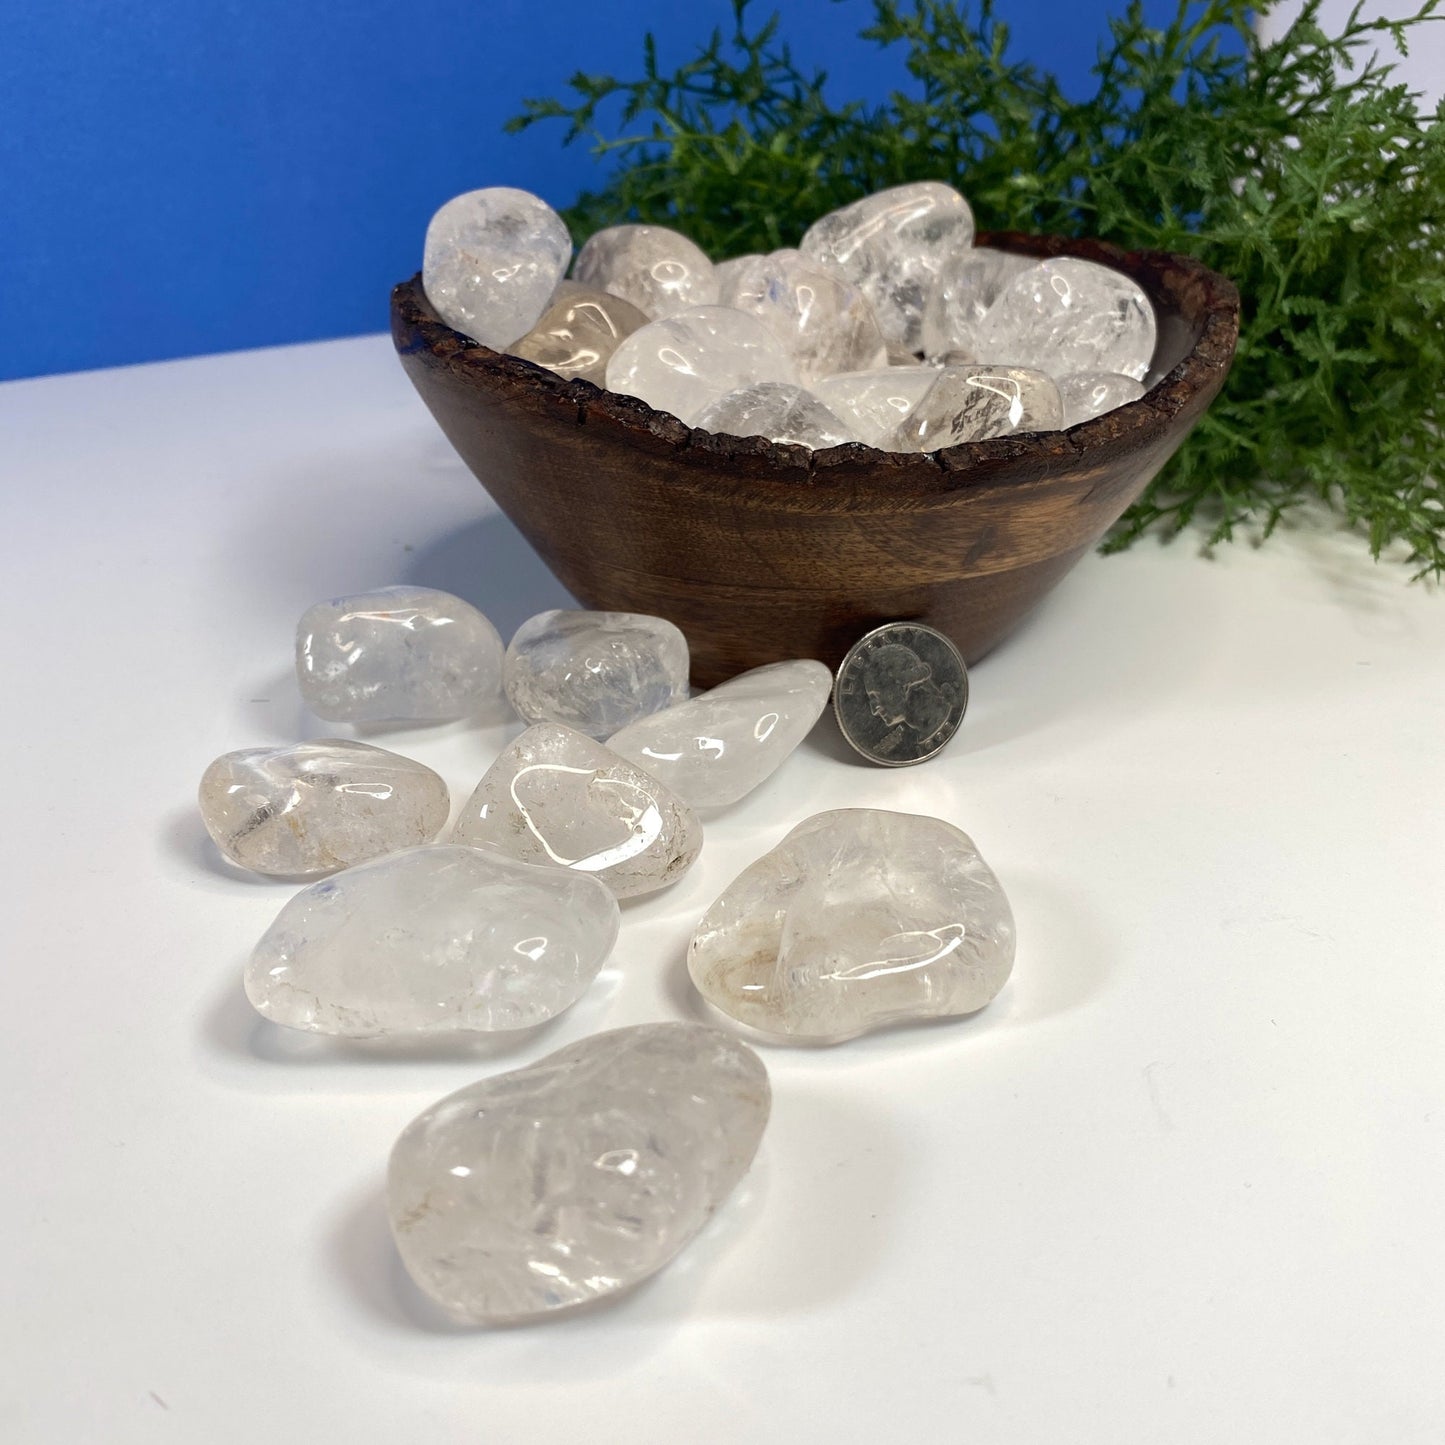 Natural Clear Quartz Crystal - White Tumbled Stone - Protection and Cleansing Crystals - genuine healing stones for all chakras